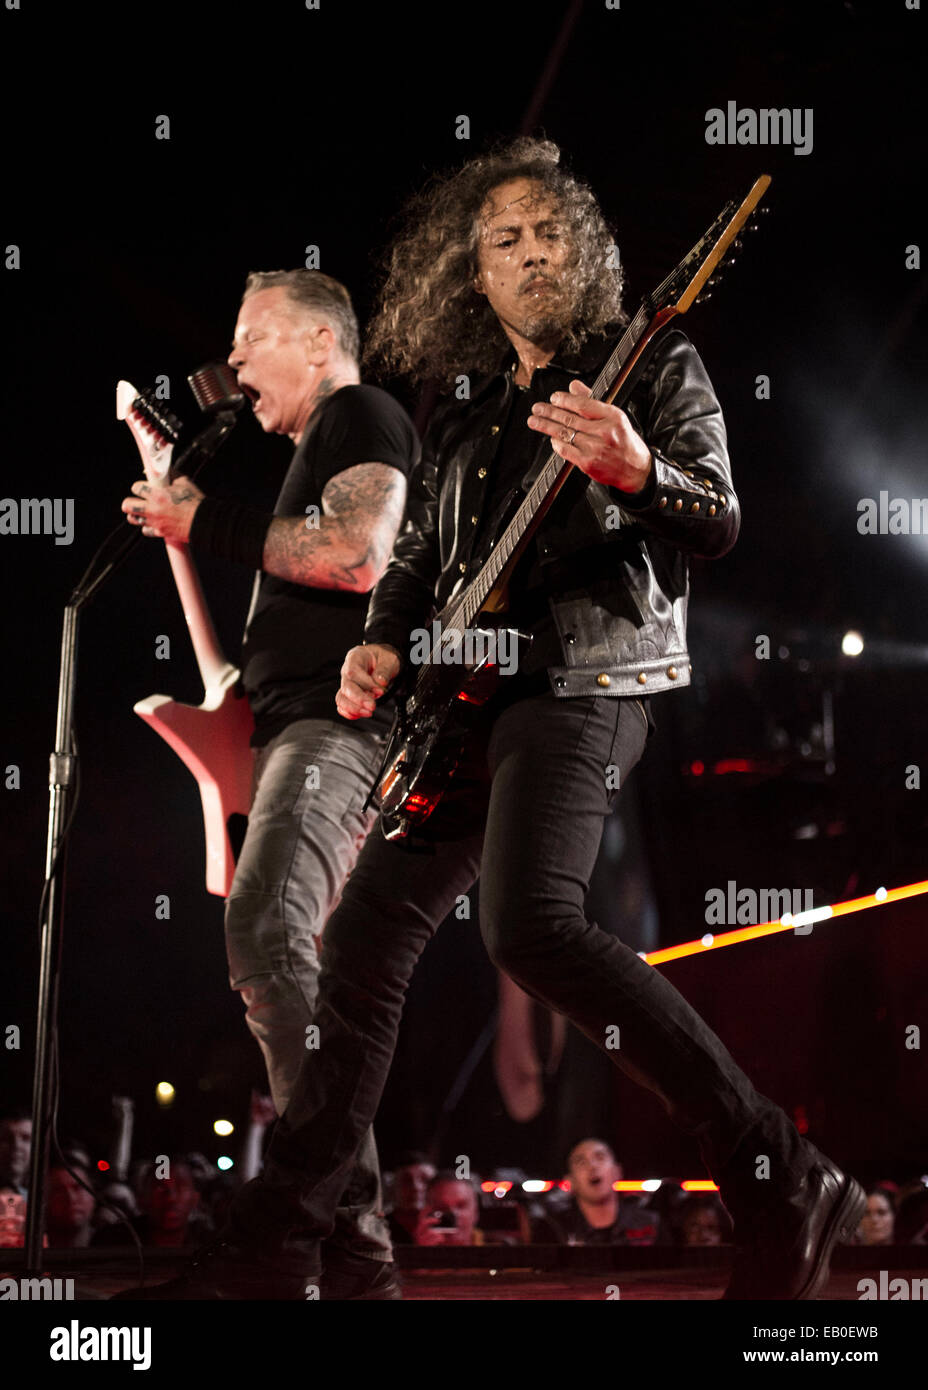 Kirk Hammett, guitarist and James Hetfield, front man of Metallica perform during the Concert for Valor November 11, 2014 in Washington, D.C. Stock Photo